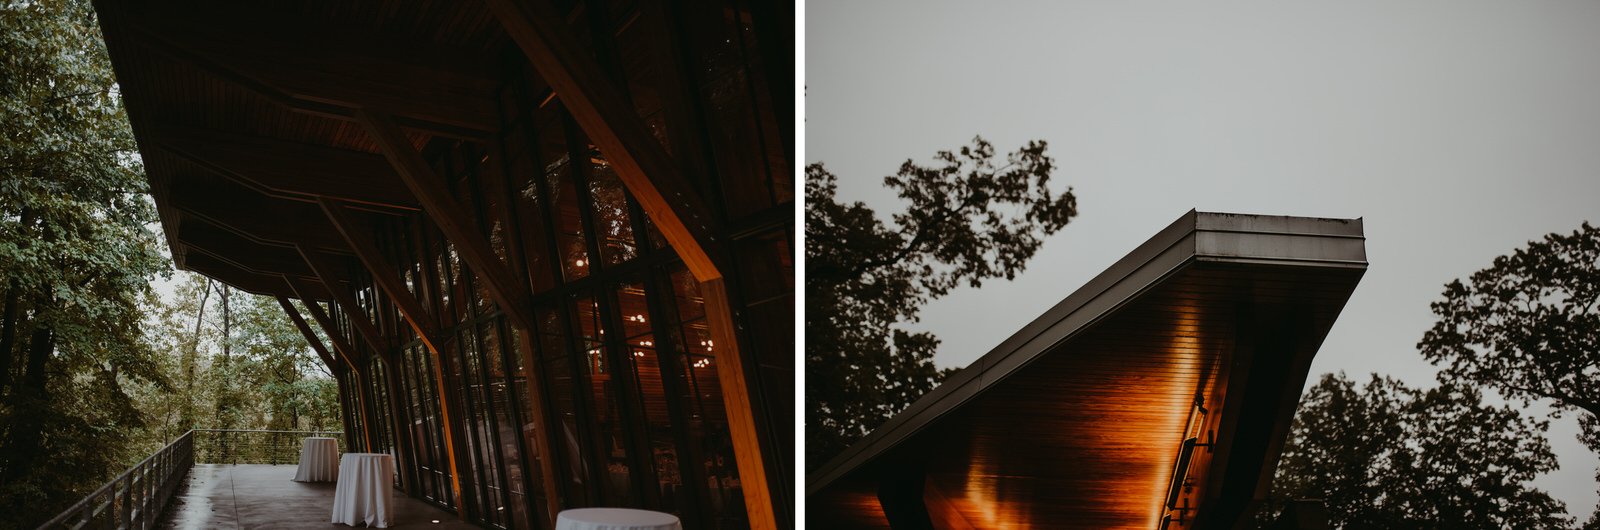 Bissell tree house Michigan, moody photography, Chicago wedding photography - The Adamkovi